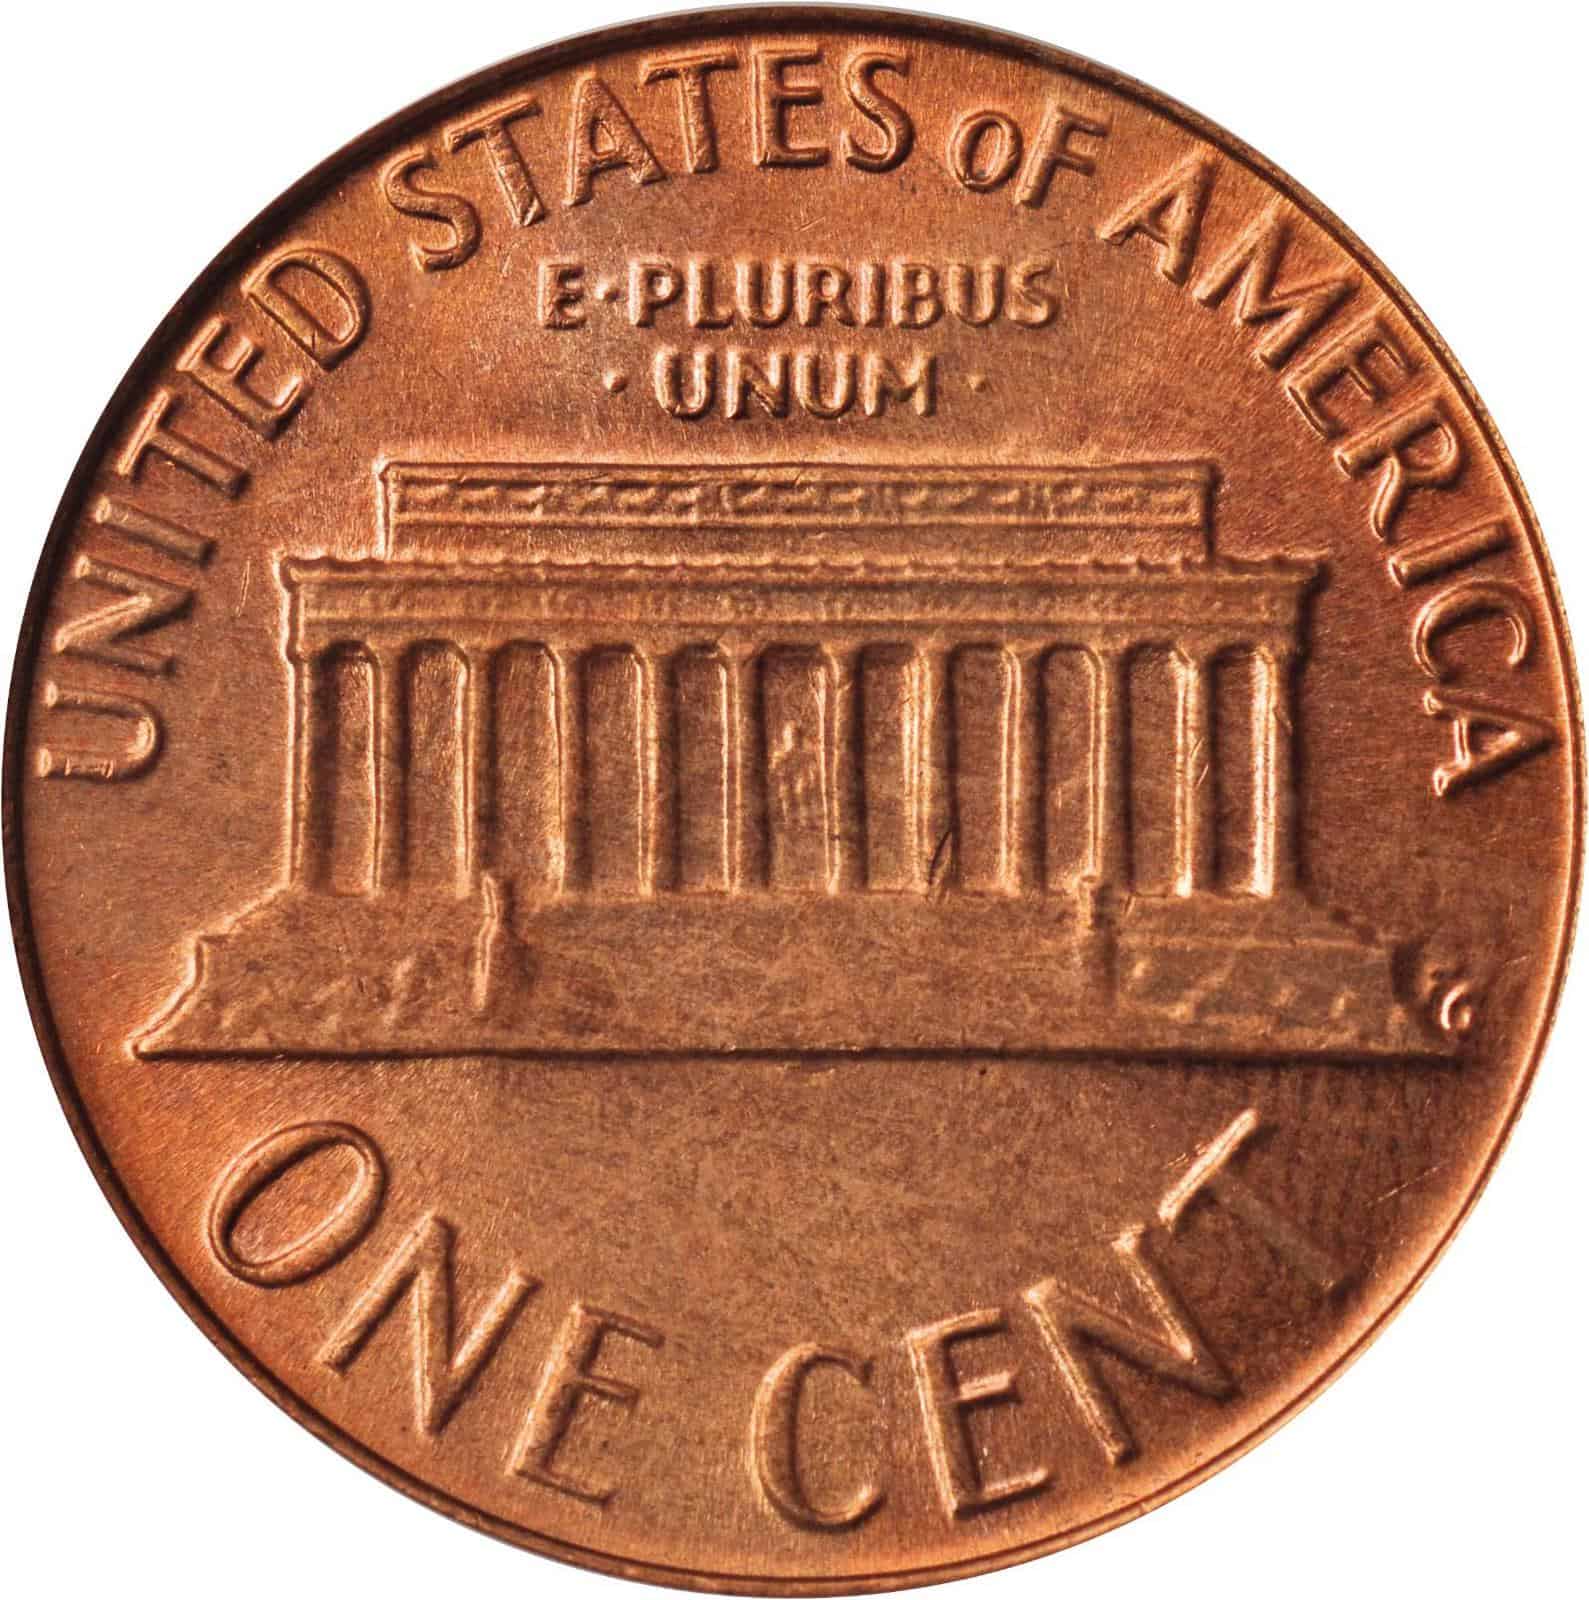 The reverse of the 1977 Lincoln penny